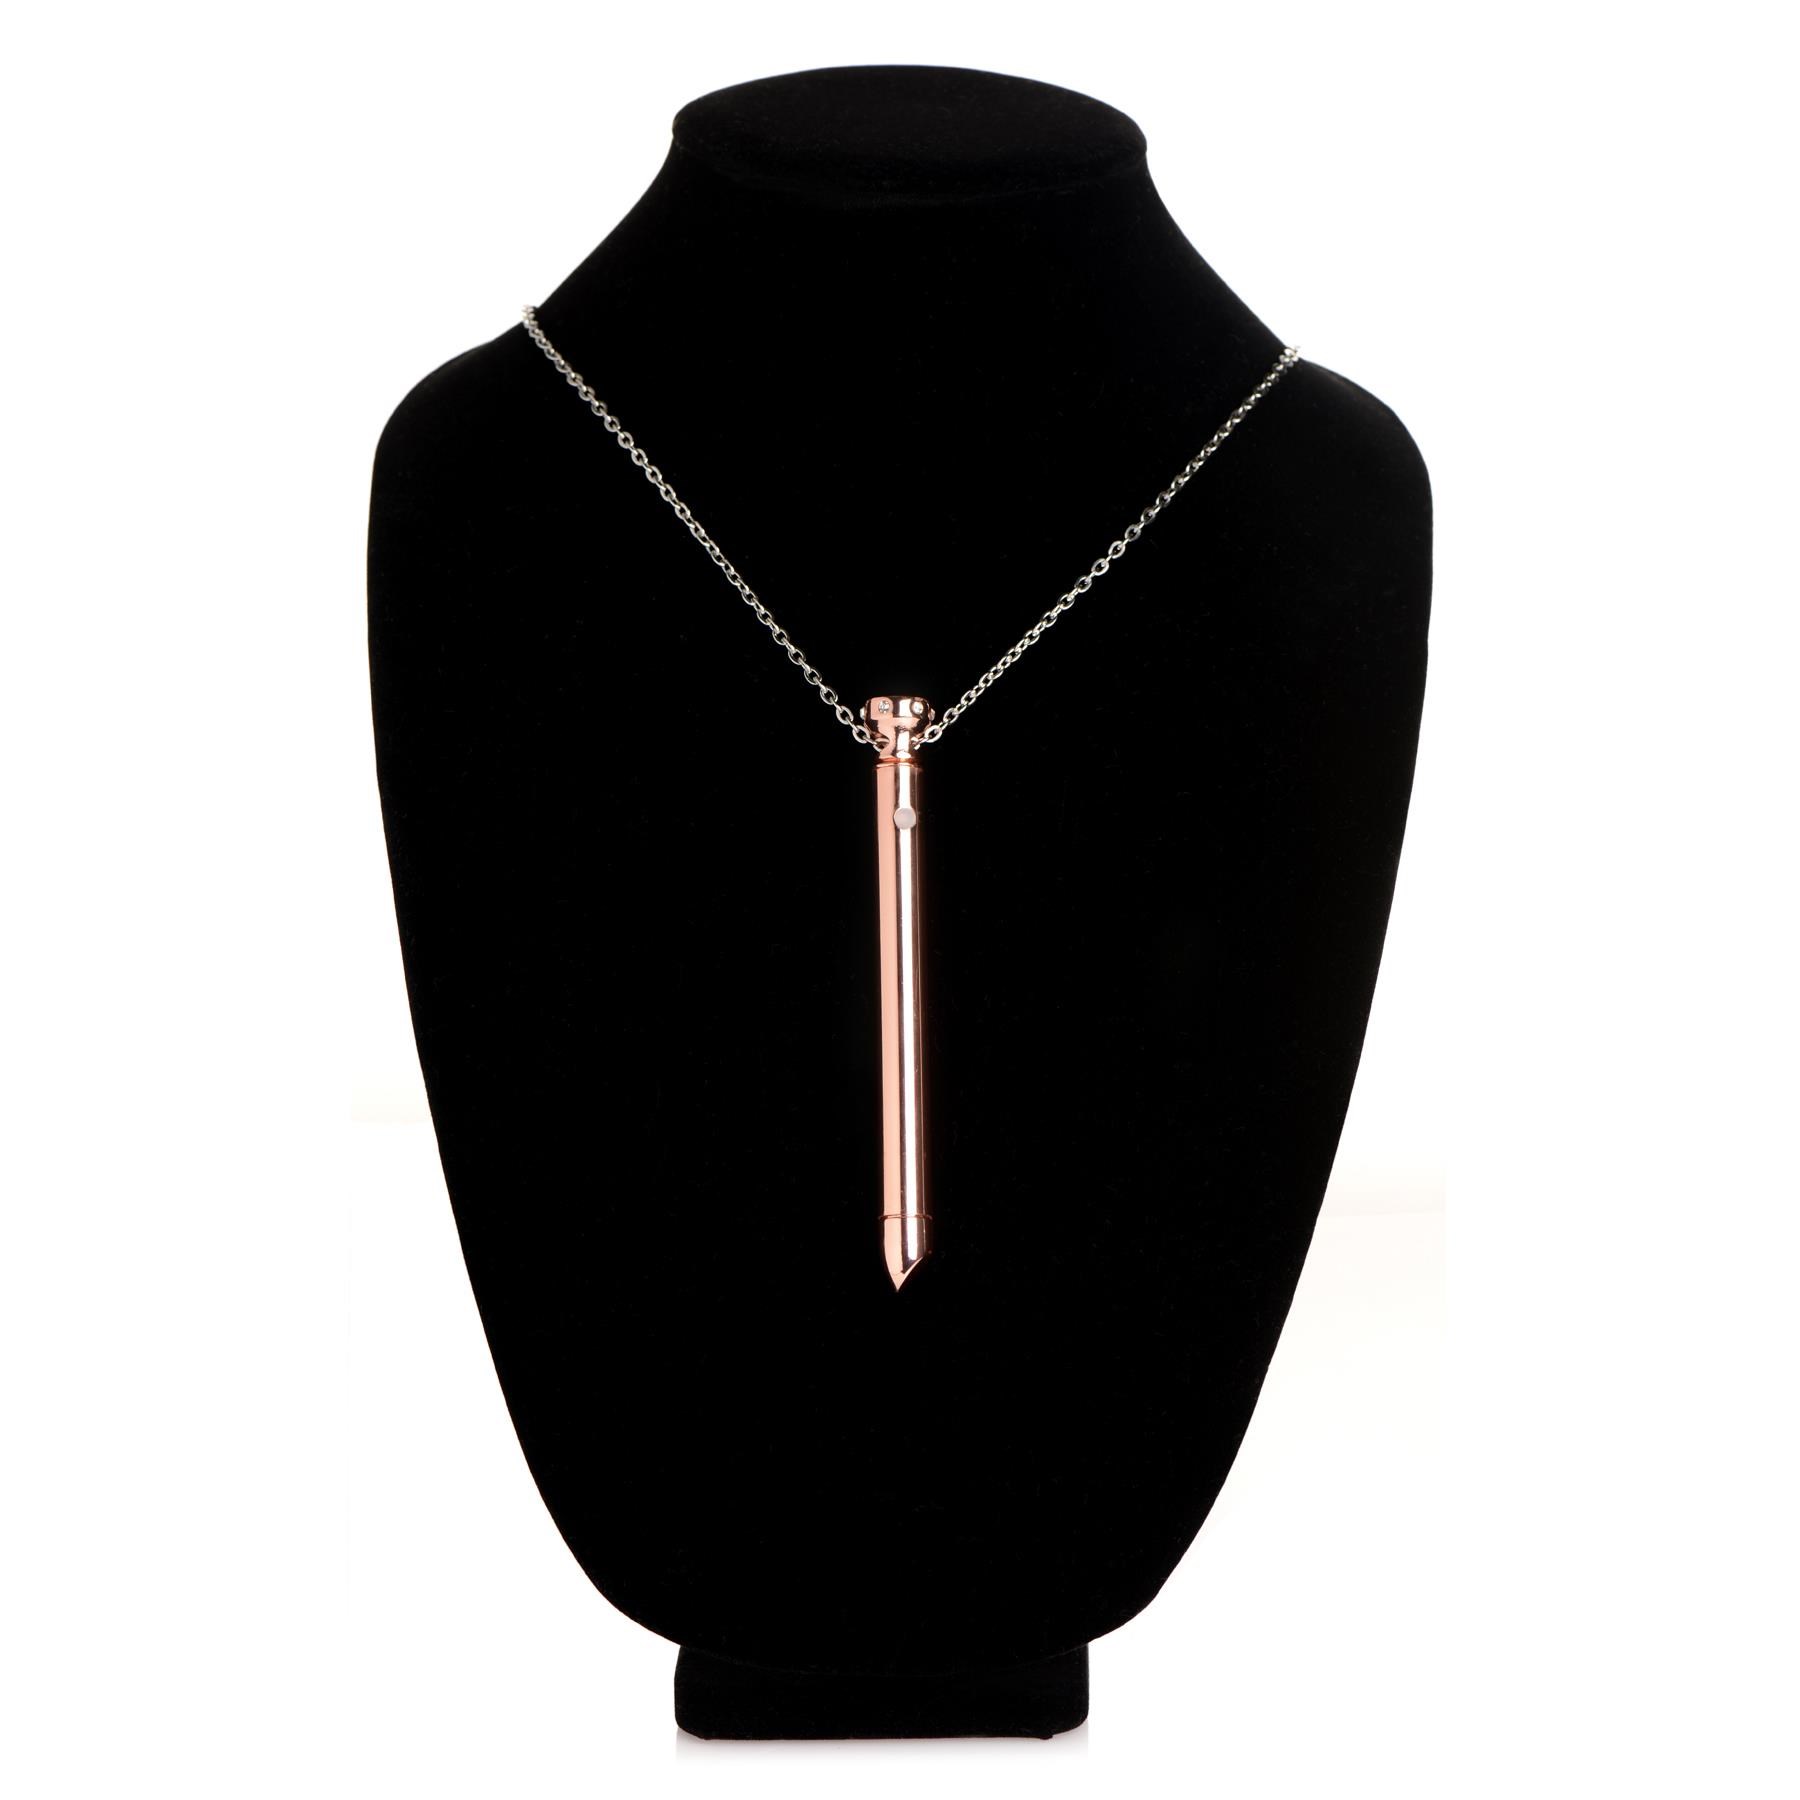 Charmed Vibrating Necklace - Product Shot - Rose Gold - On Mannequin